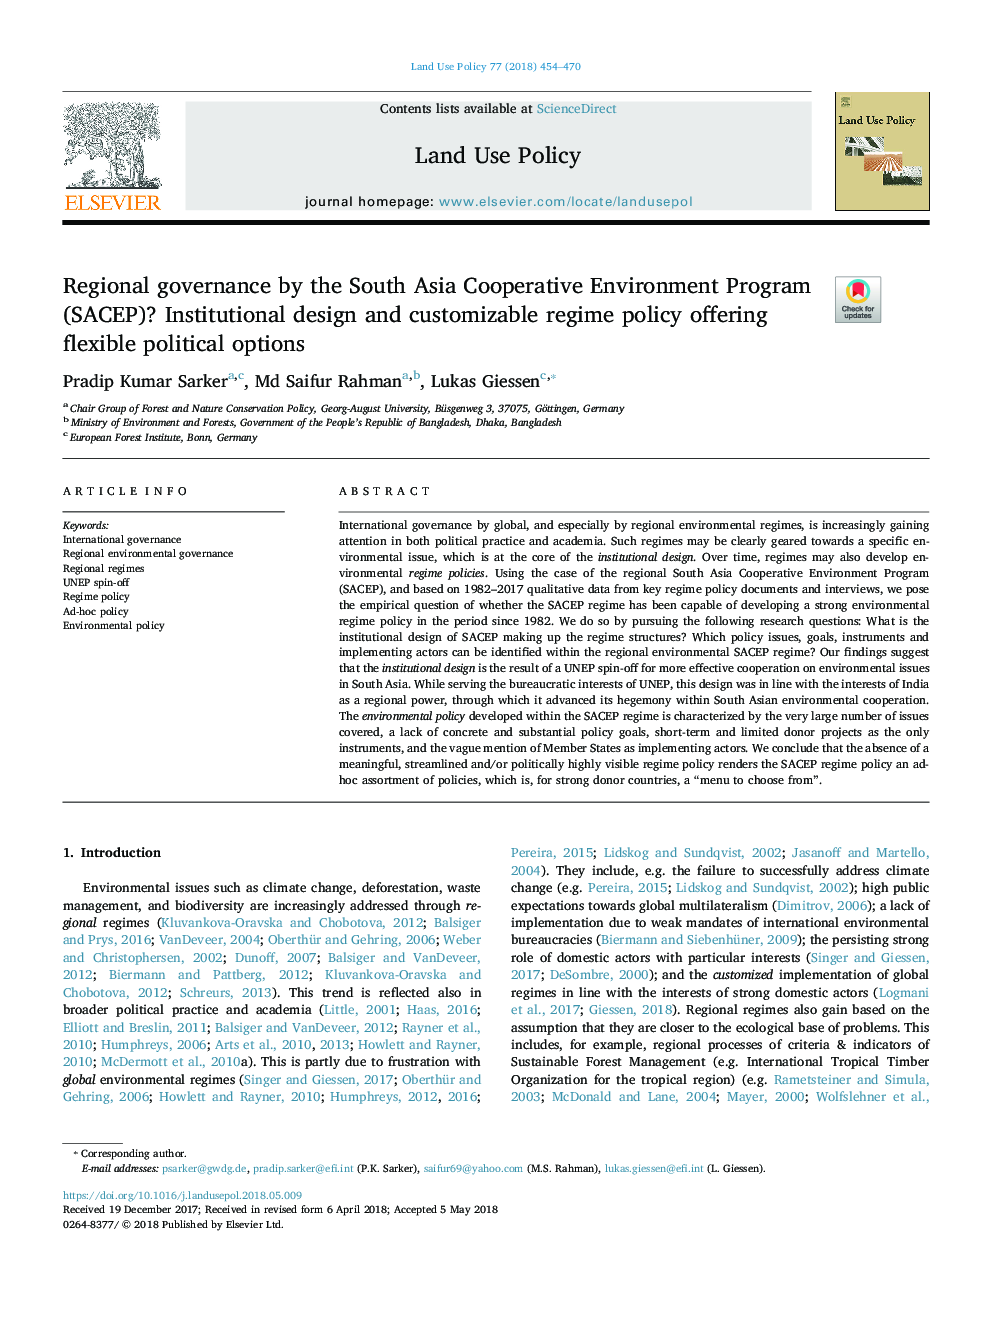 Regional governance by the South Asia Cooperative Environment Program (SACEP)? Institutional design and customizable regime policy offering flexible political options